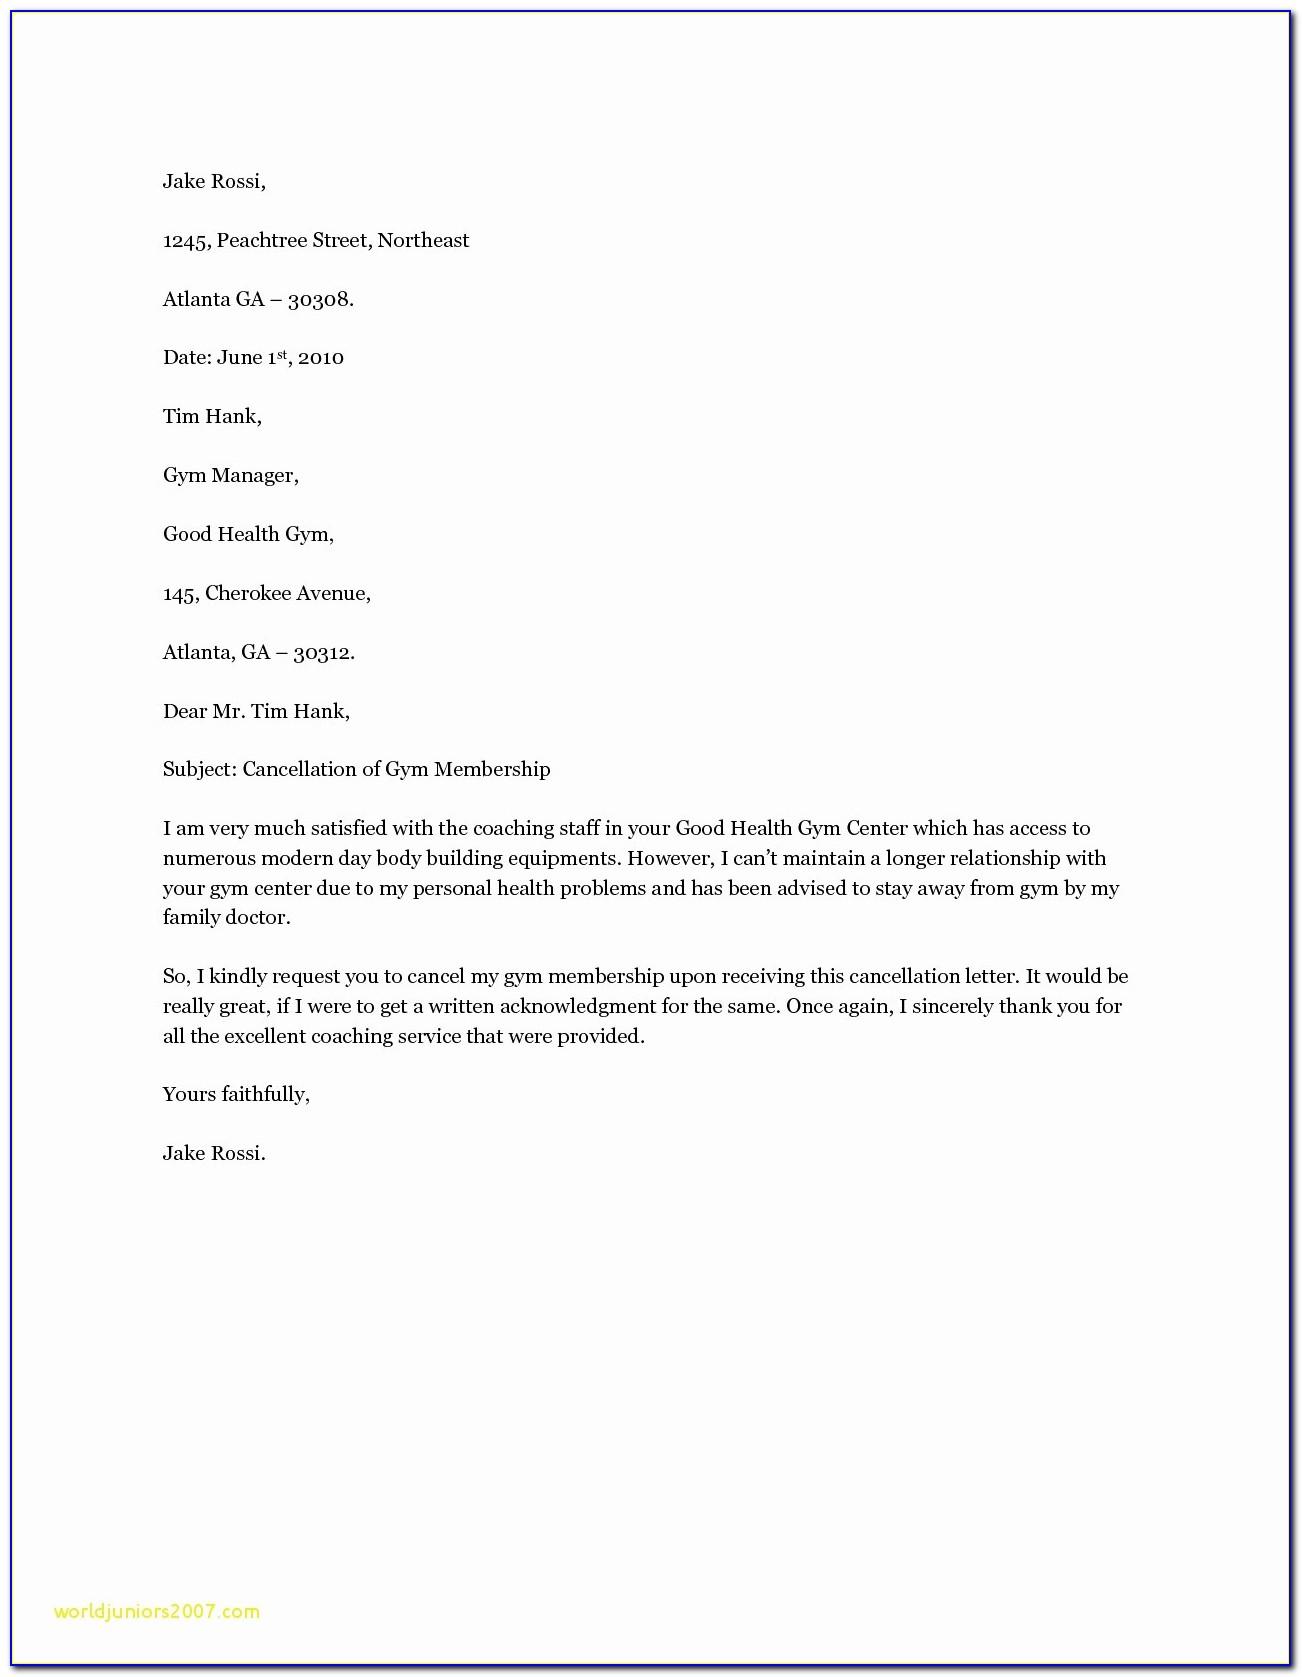 Gym Membership Cancellation Letter Examples